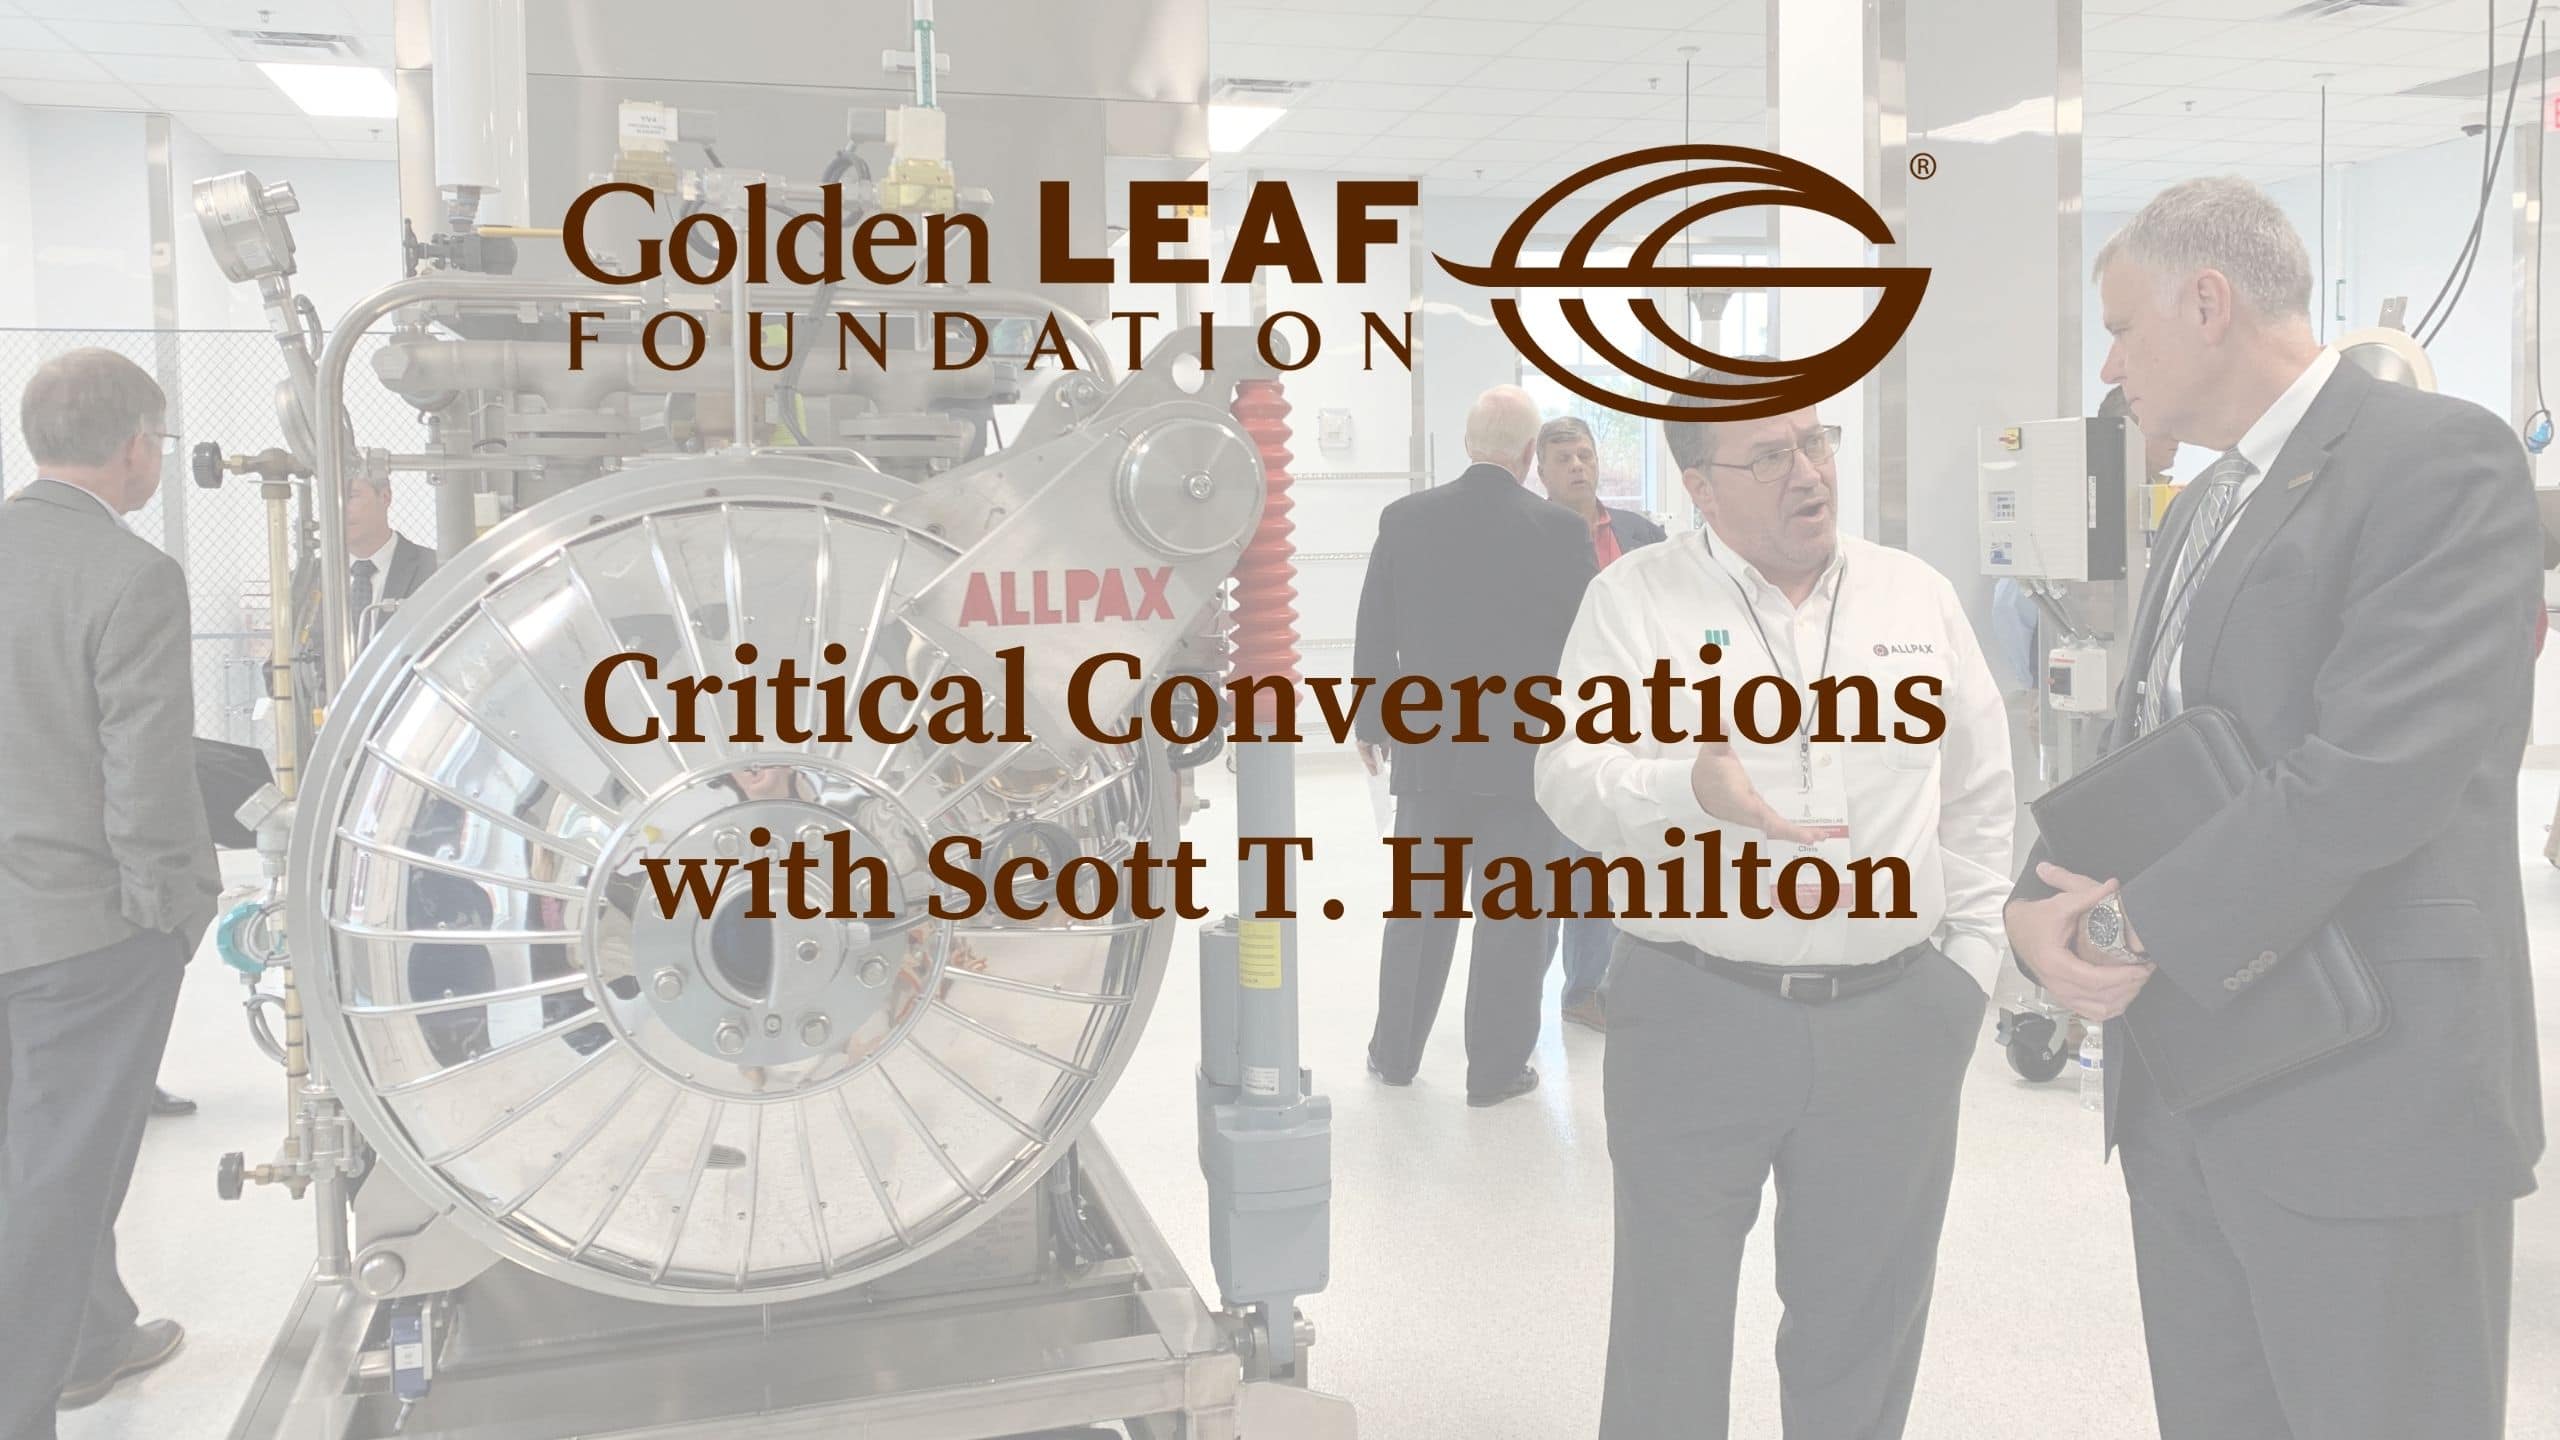 Critical Conversations with Scott T. Hamilton featuring Adrian Percy, Executive Director of the N.C. Plant Sciences Initiative